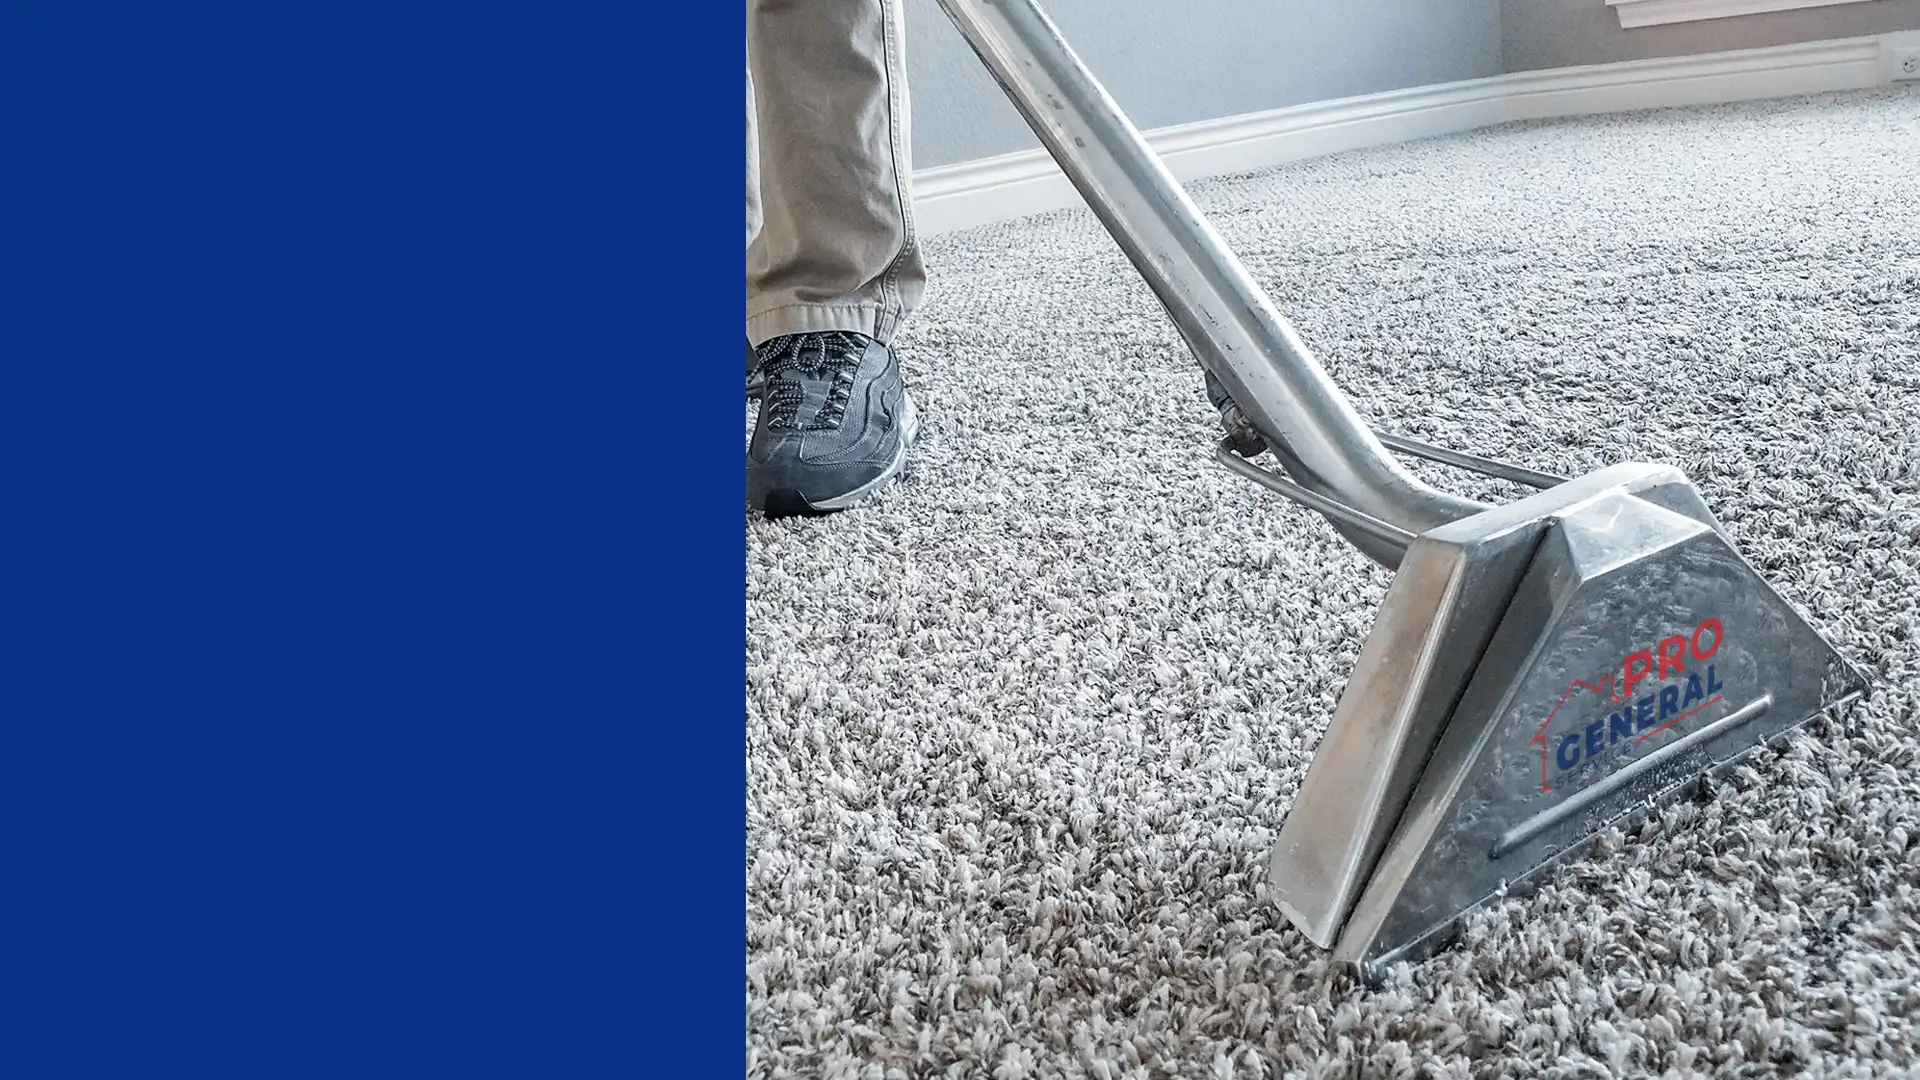 ProGeneralService - Carpet Cleaning in Houston areas.